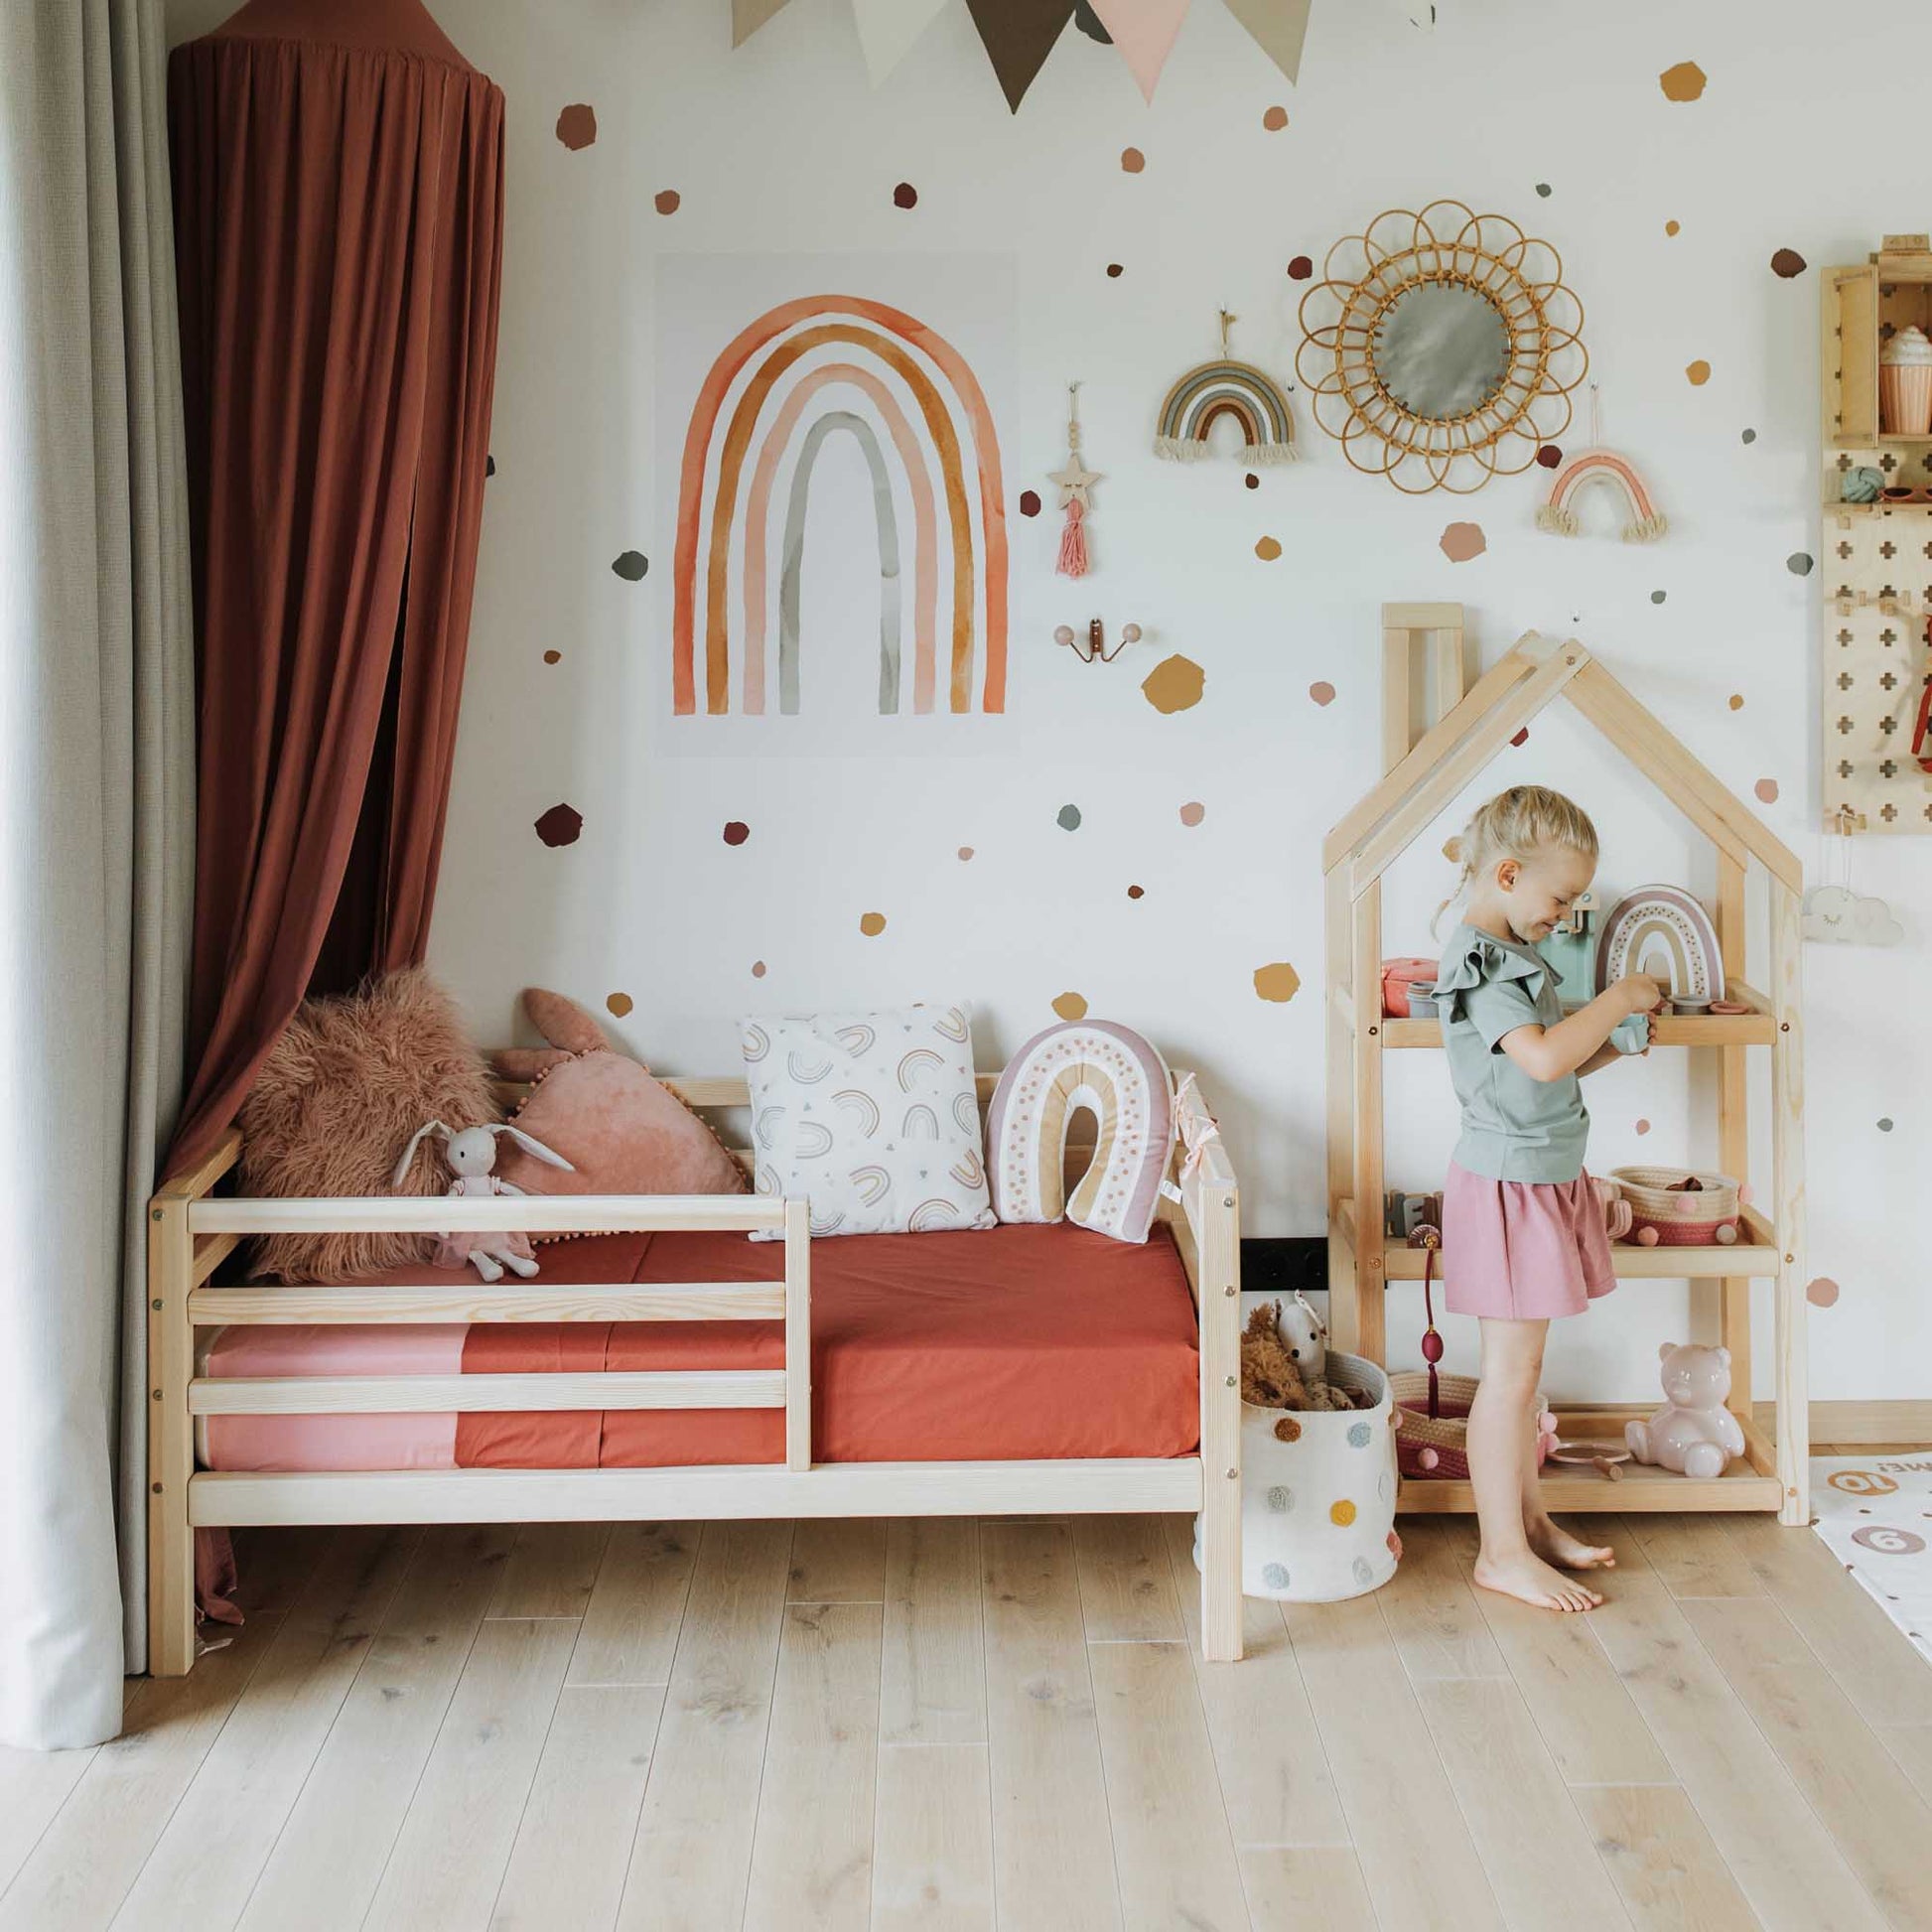 A little girl's room with a Sweet Home From Wood kids' bed on legs with a horizontal rail fence and polka dot walls.